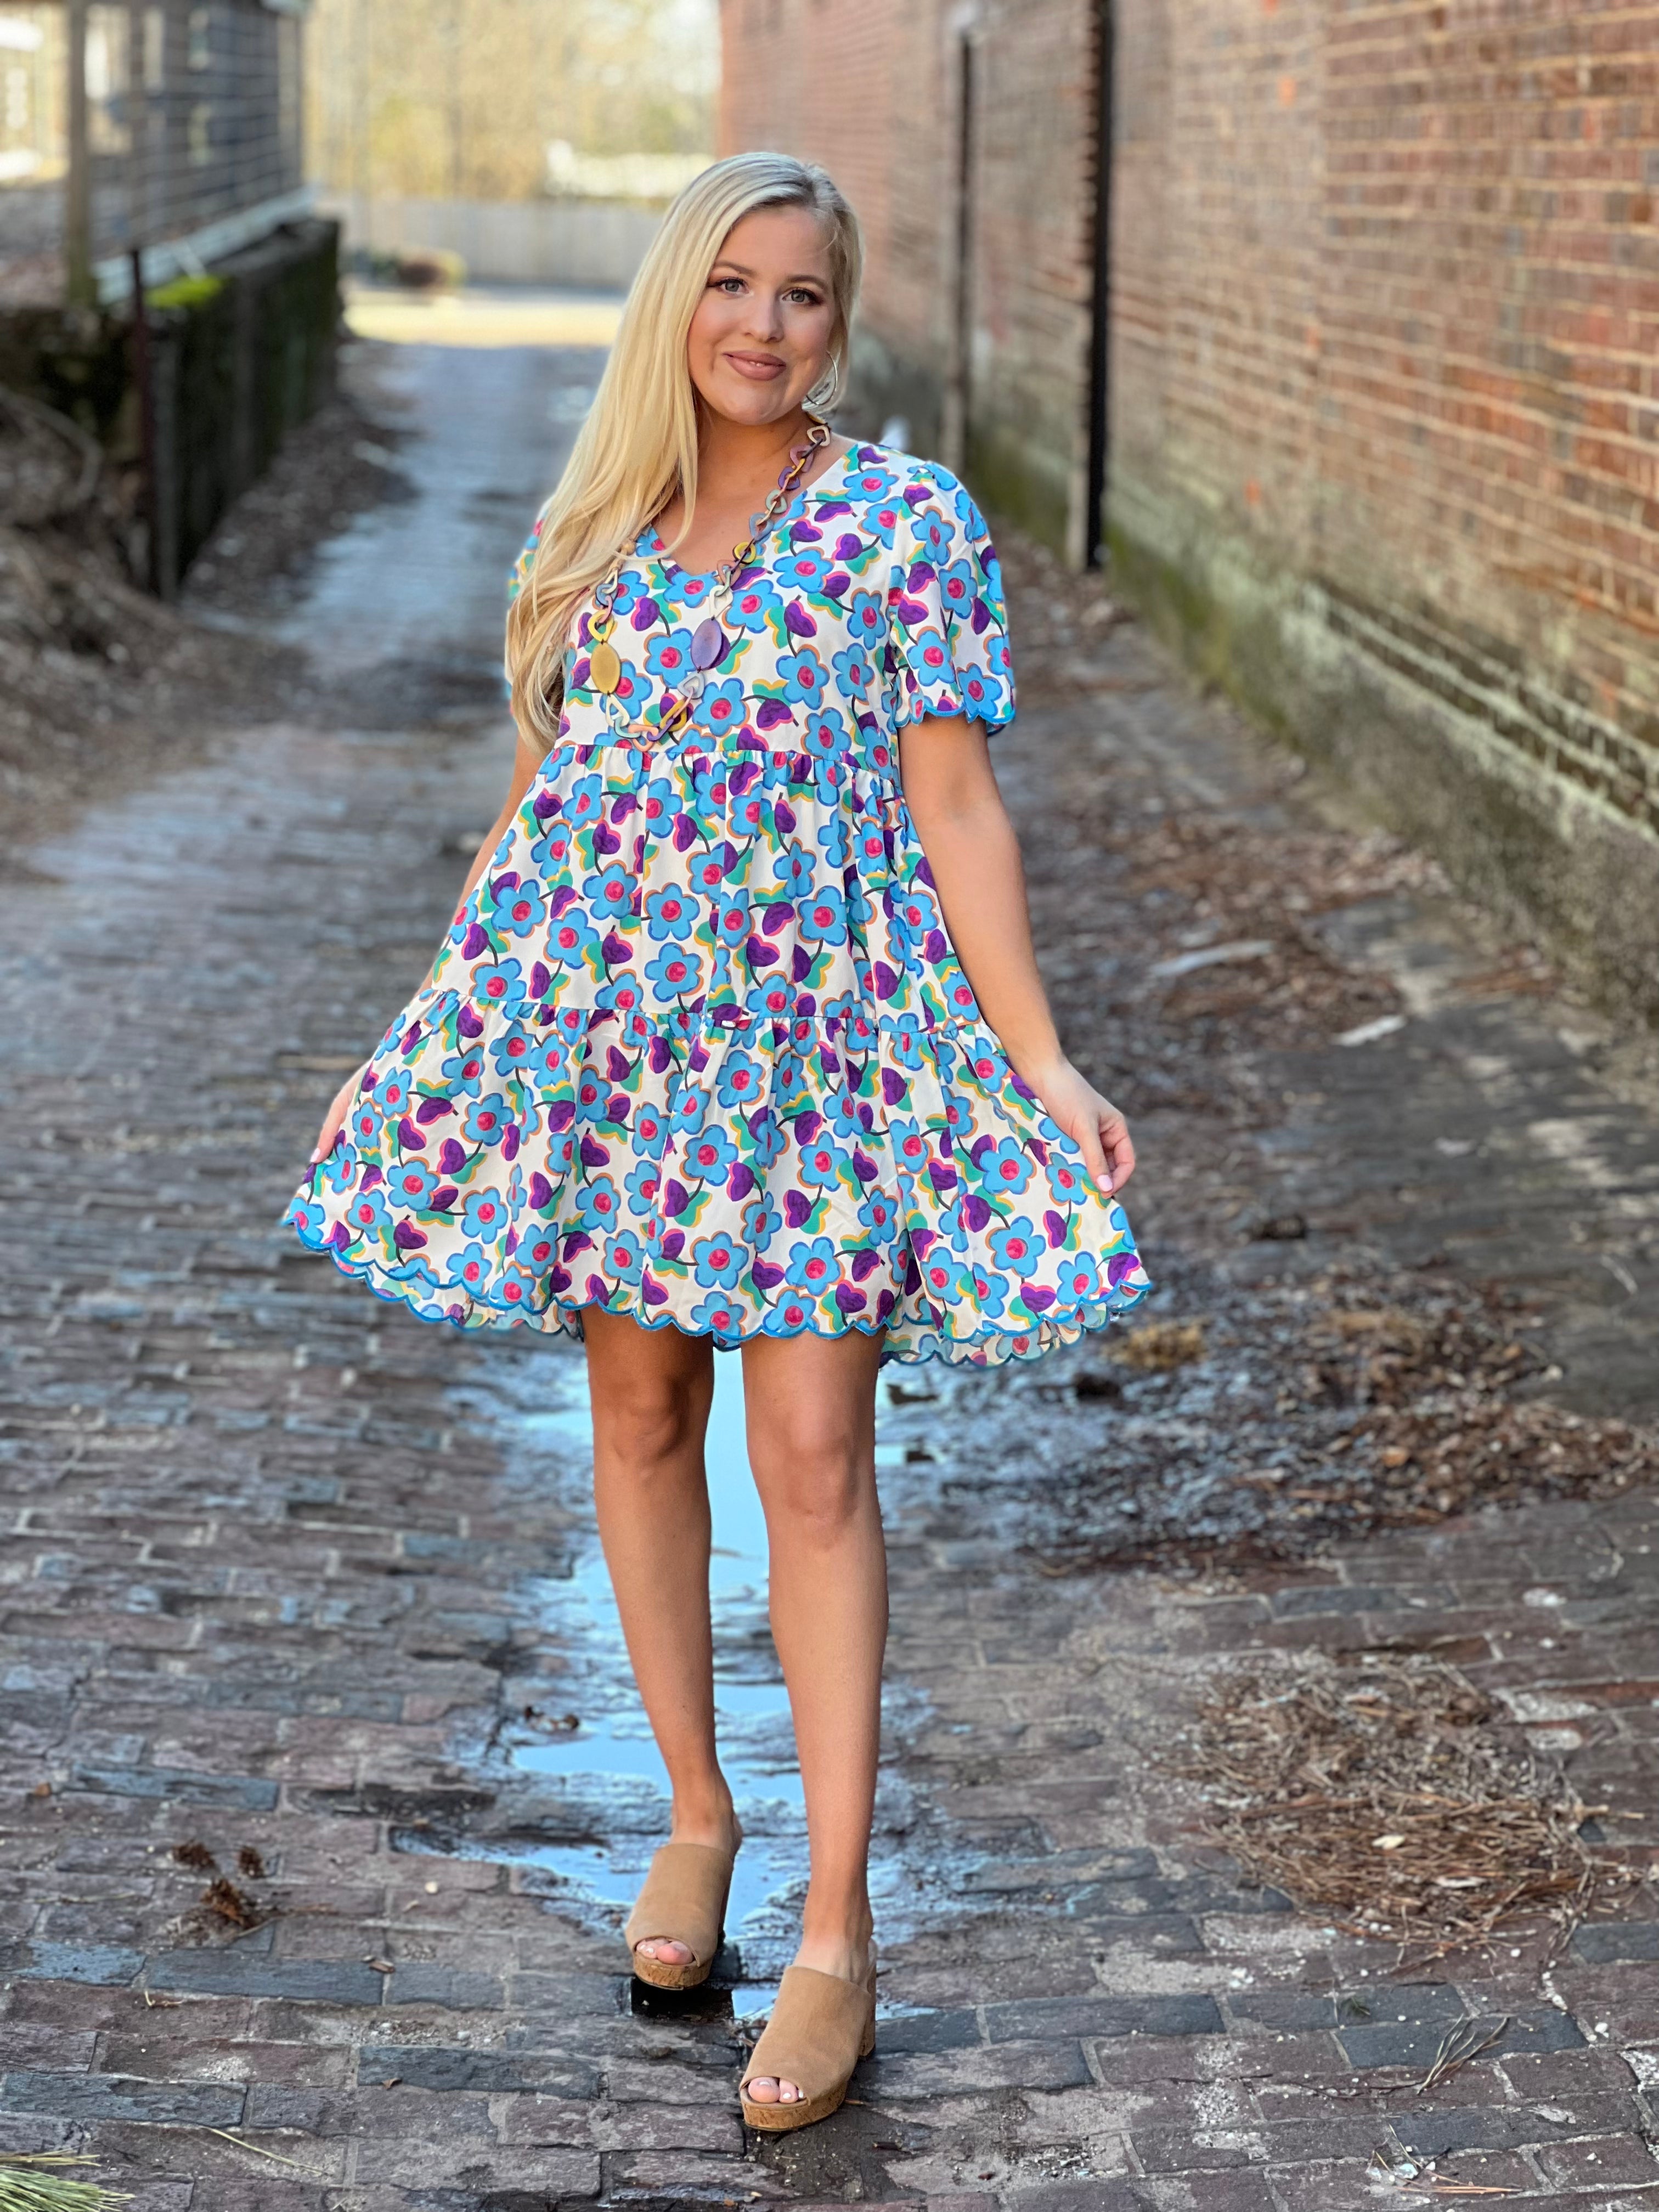 Floral tiered dress